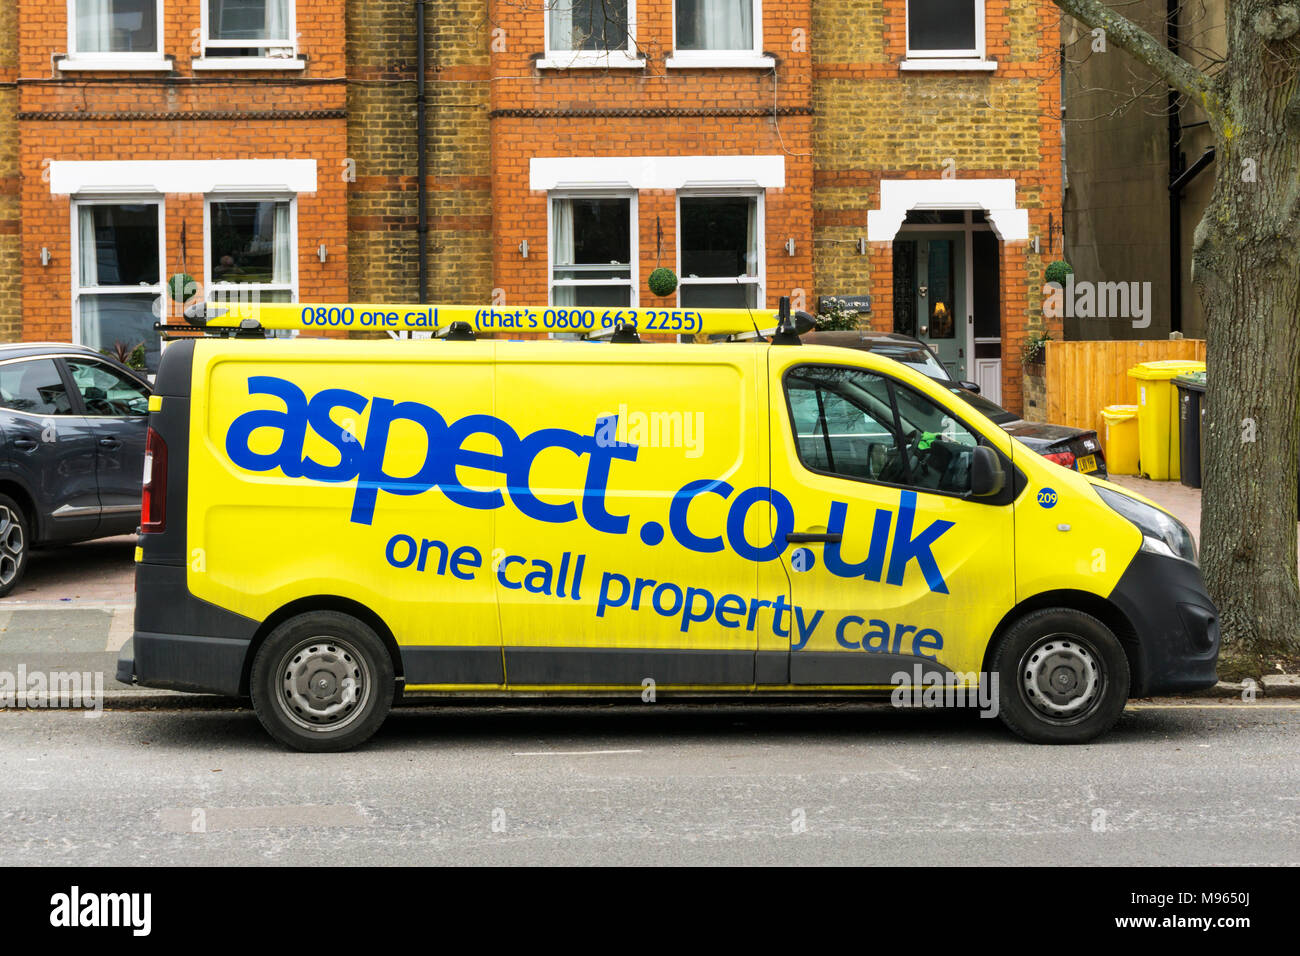 A van for Aspect.co.uk for one call property care. Stock Photo